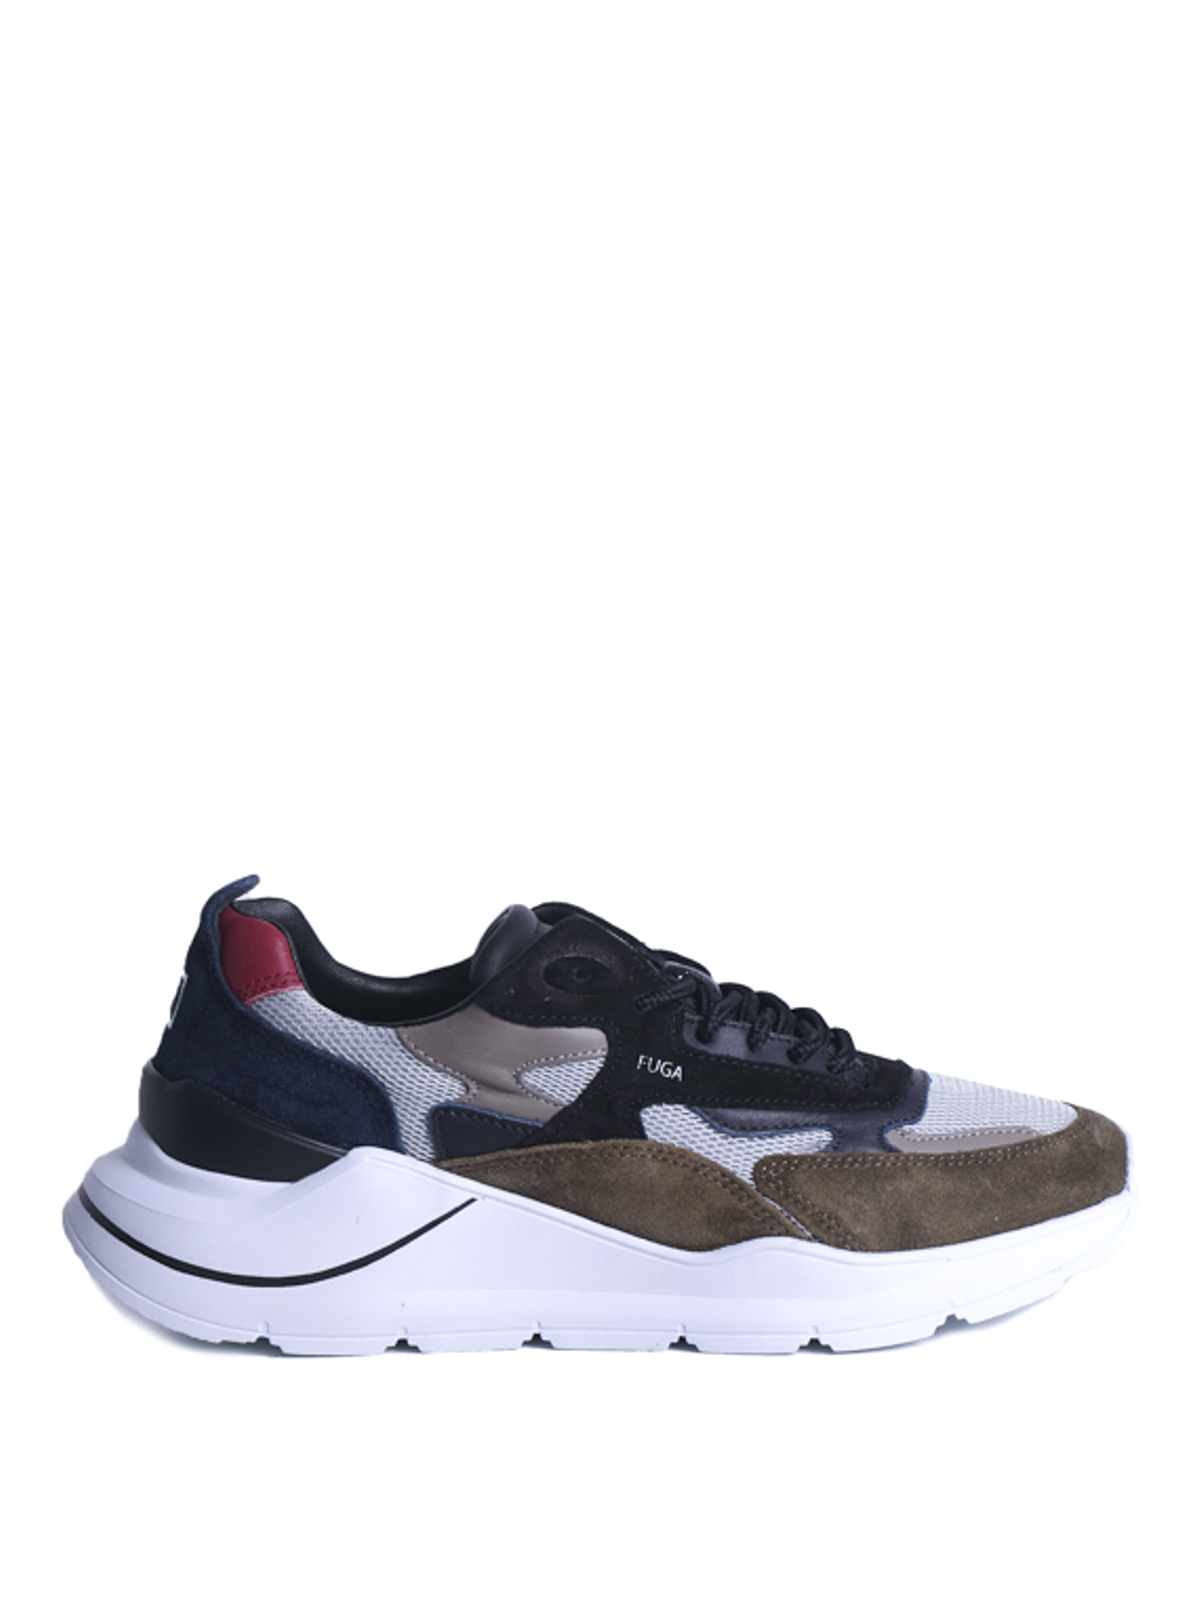 Usikker pizza Kabelbane Trainers D.A.T.E. - Fuga sneakers - M371FGMEGK | Shop online at iKRIX